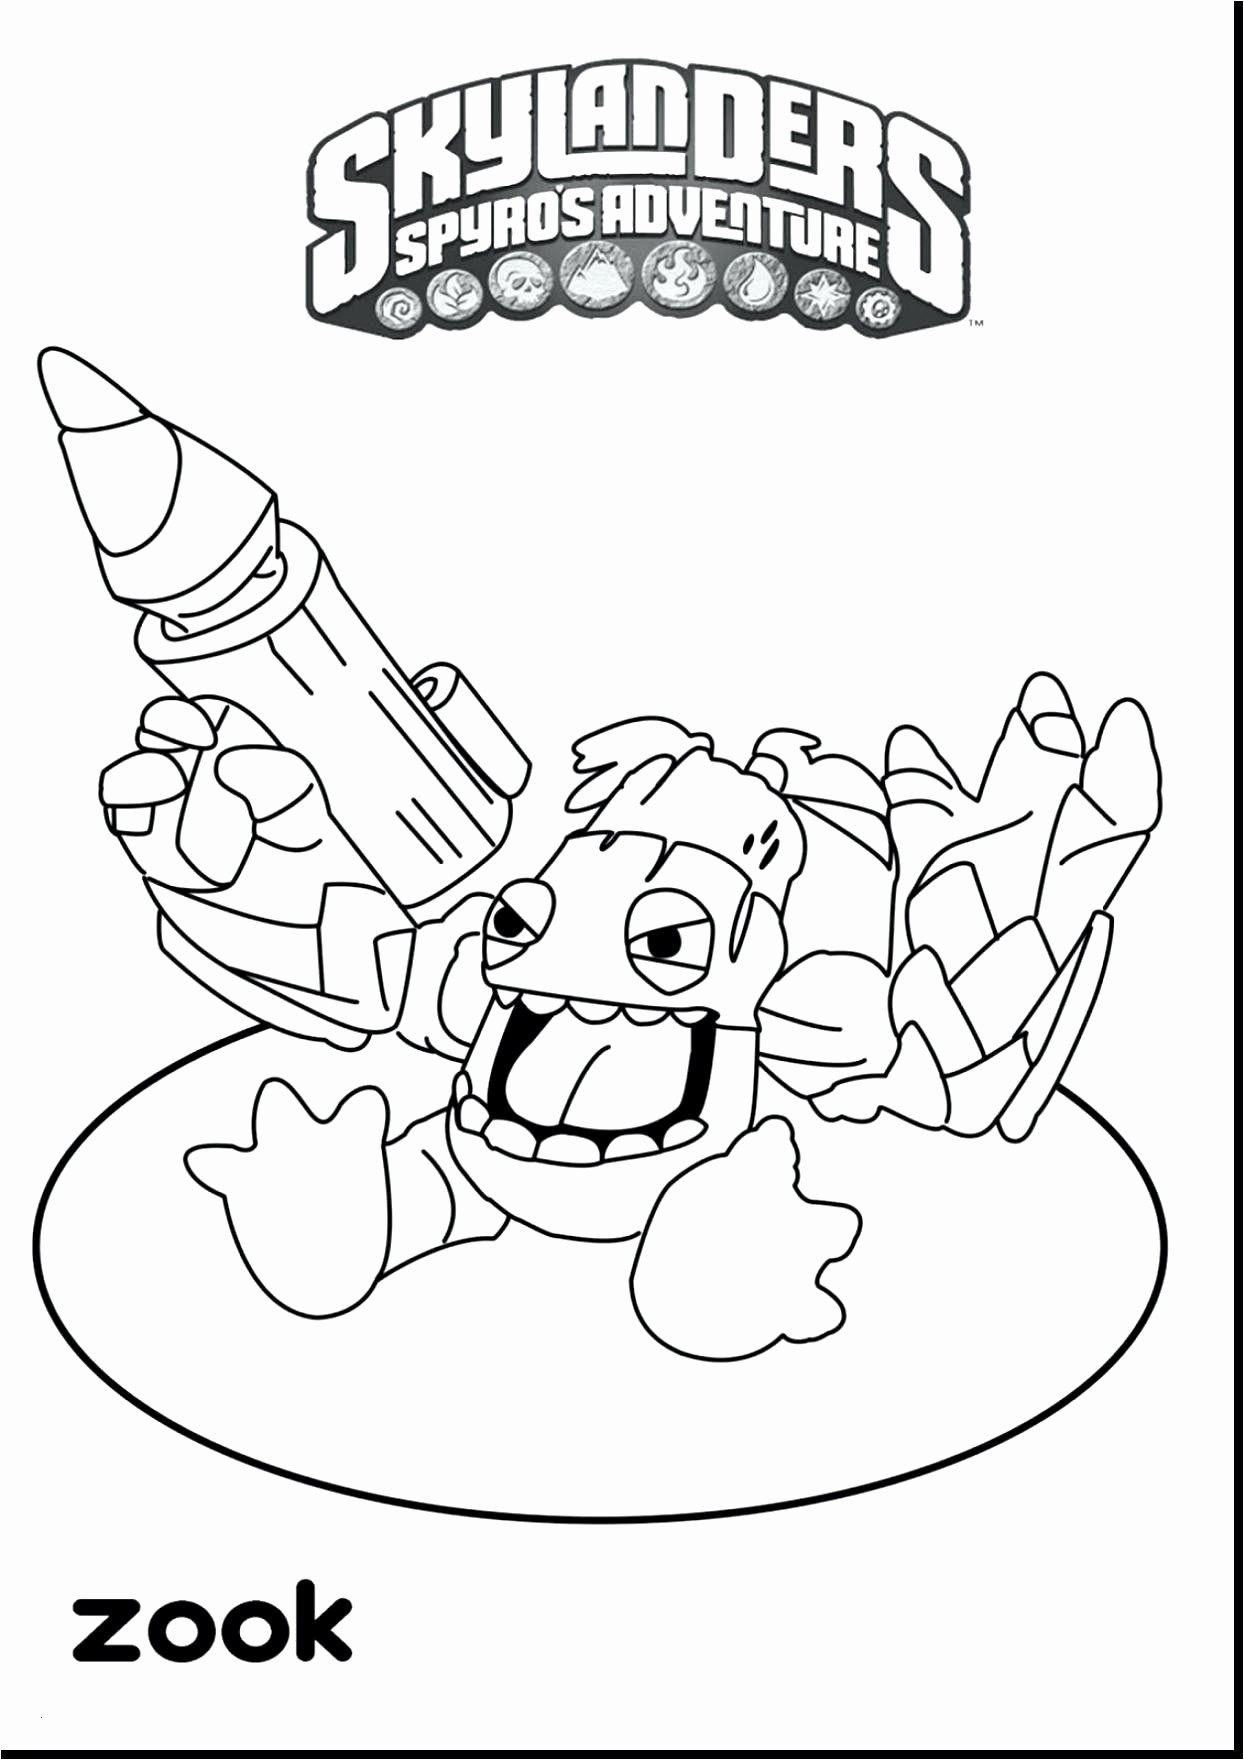 Cool Coloring Page Inspirational Witch Coloring Pages New Crayola Pages 0d Coloring Page · science coloring